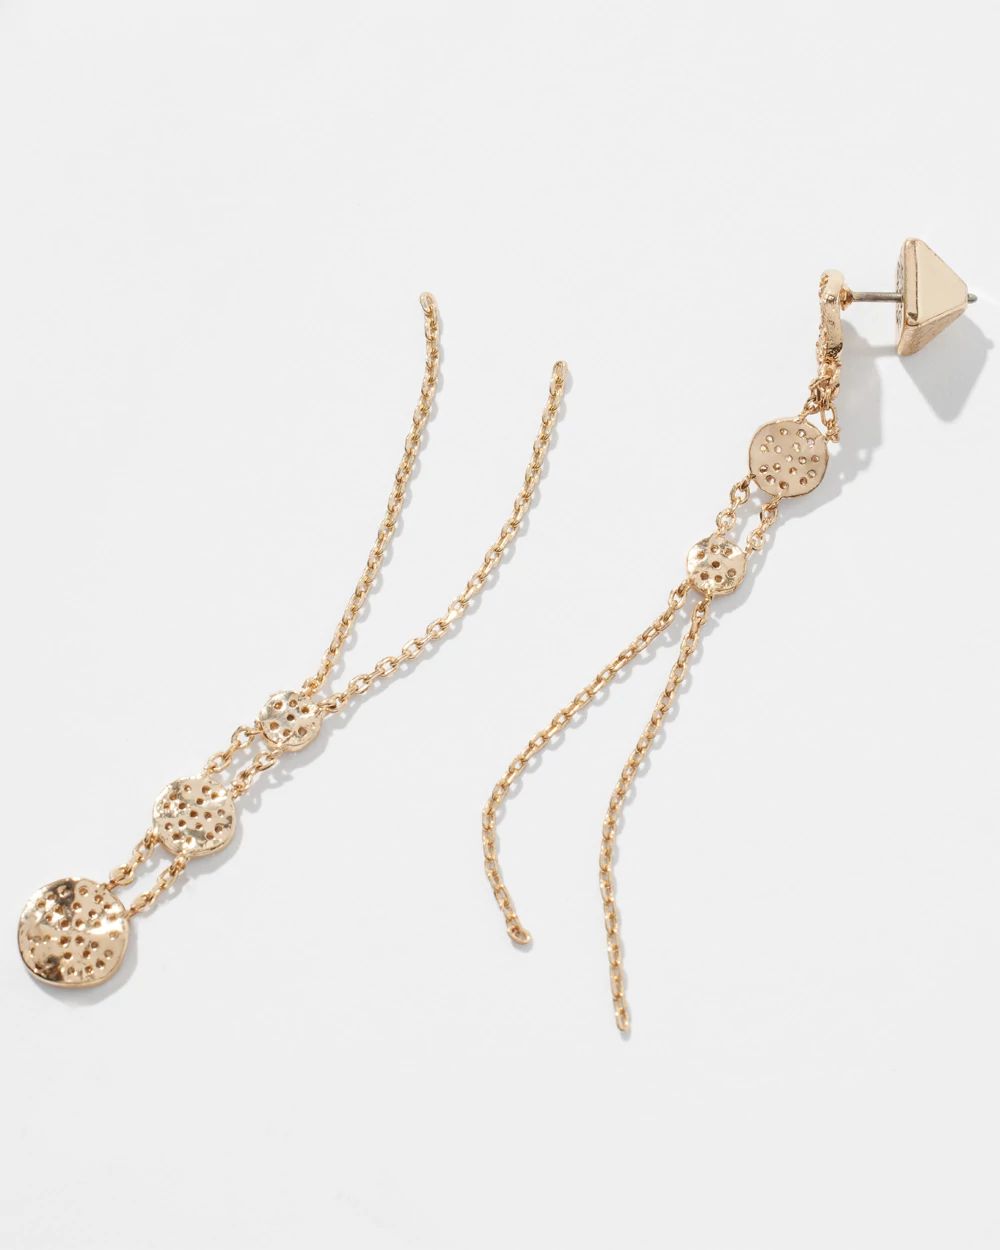 Gold Pave Linear Chain Earrings click to view larger image.